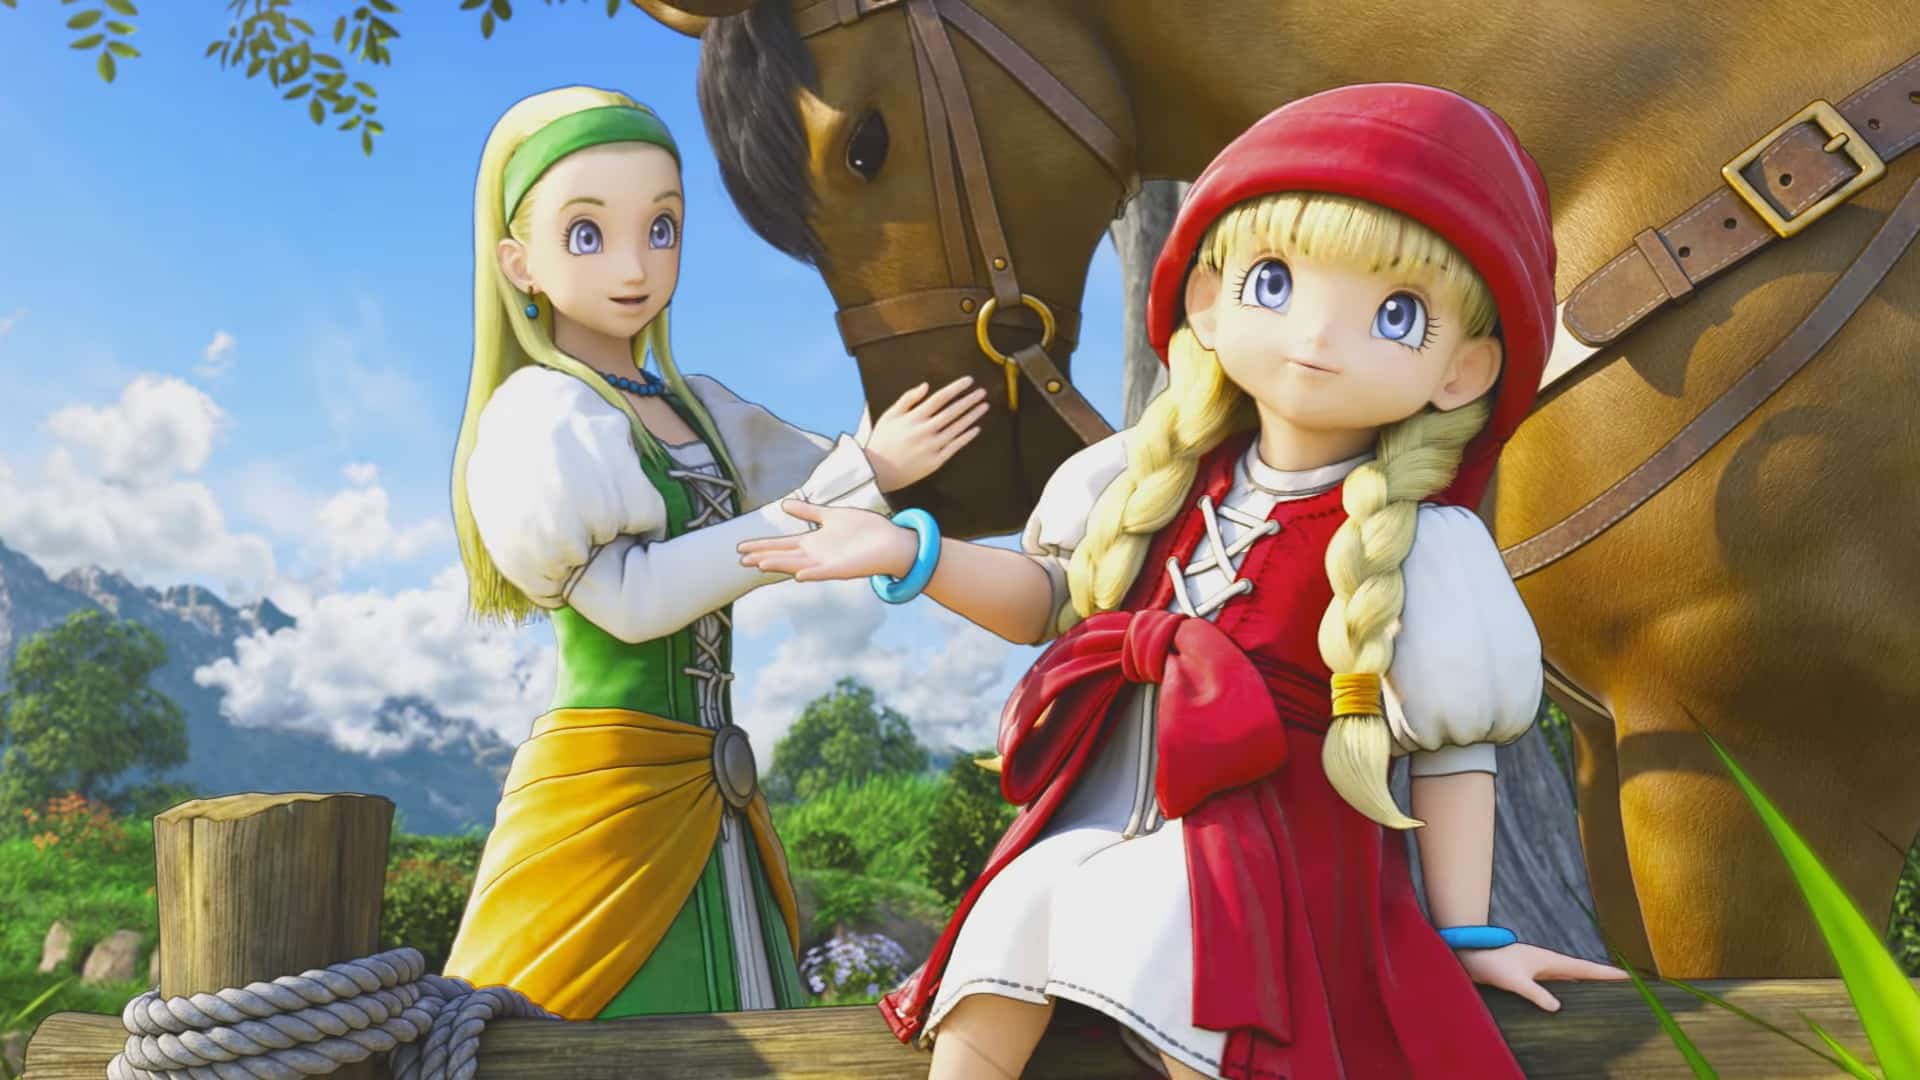 Square Enix Confirms Dragon Quest XI for Switch Is Based on PS4